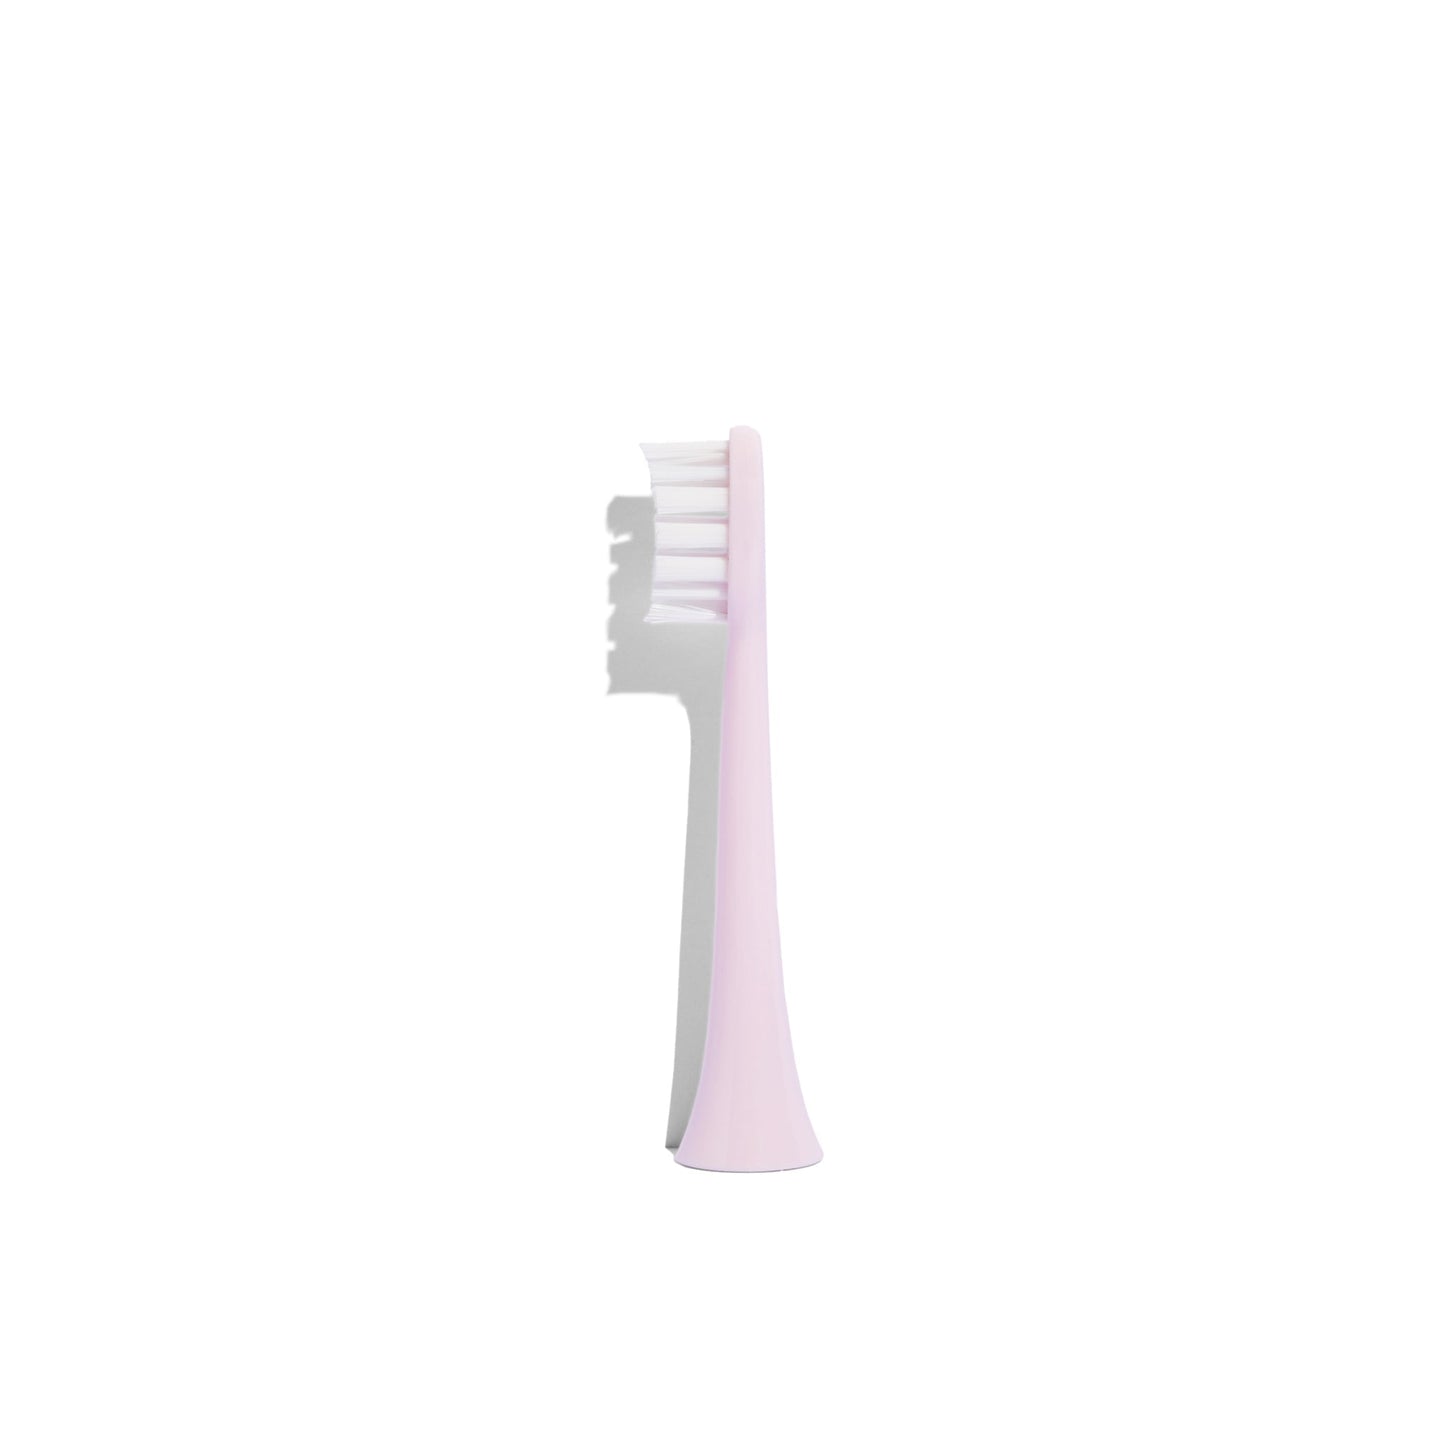 GEM Electric Toothbrush Replacement Heads 2 pack - #shop_name - -Prana Wholefoods